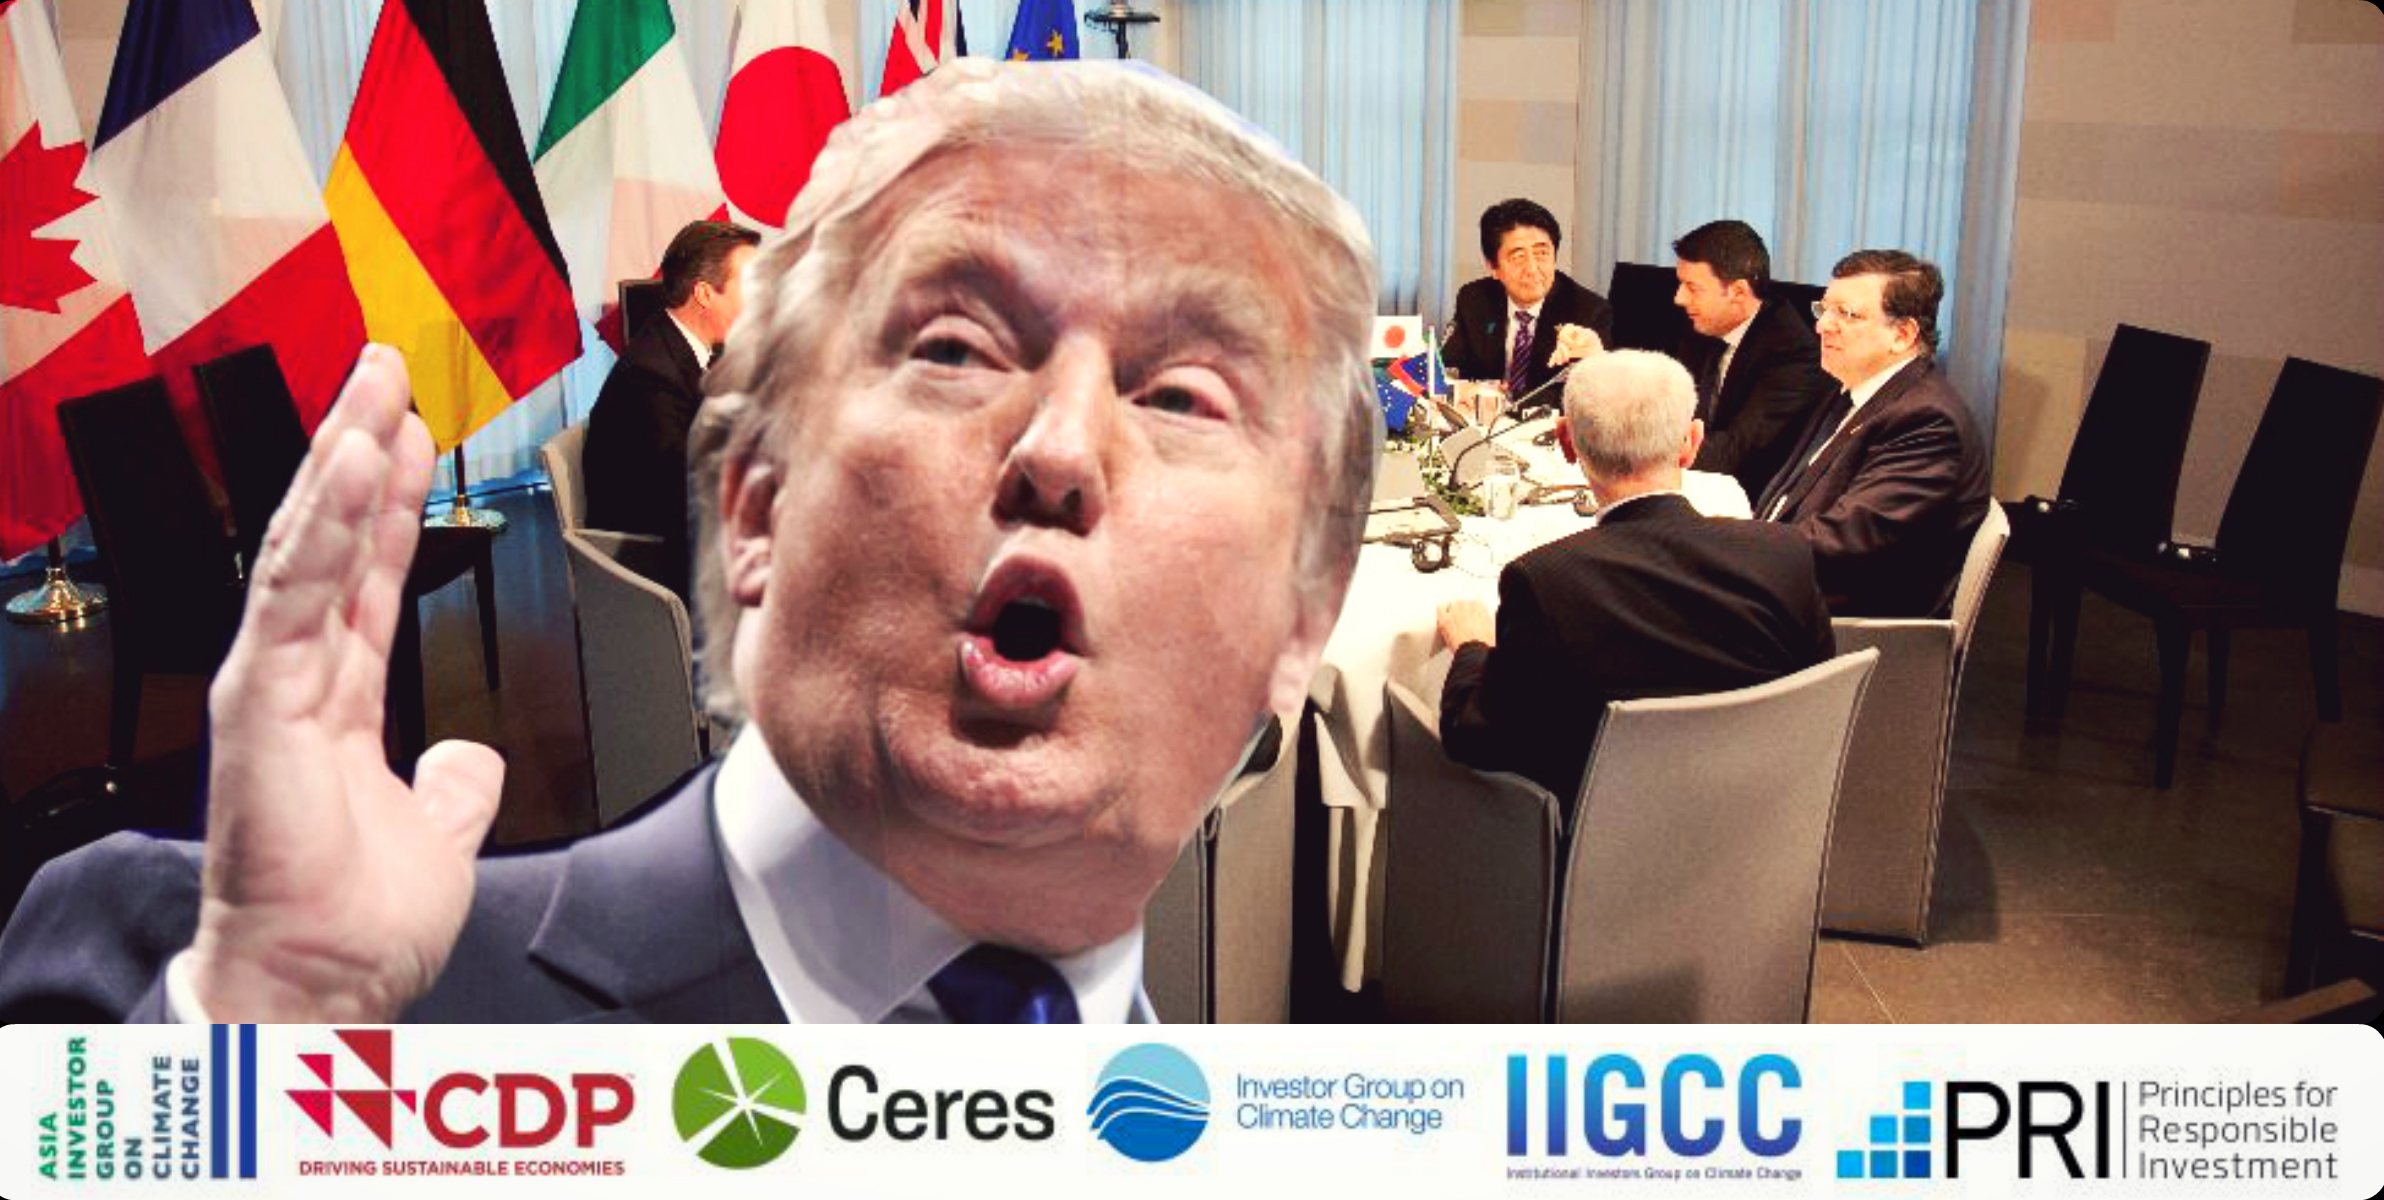 217 Global Investment Powers, Managing $15T, Implore Trump to Abide by Paris Climate Agreement